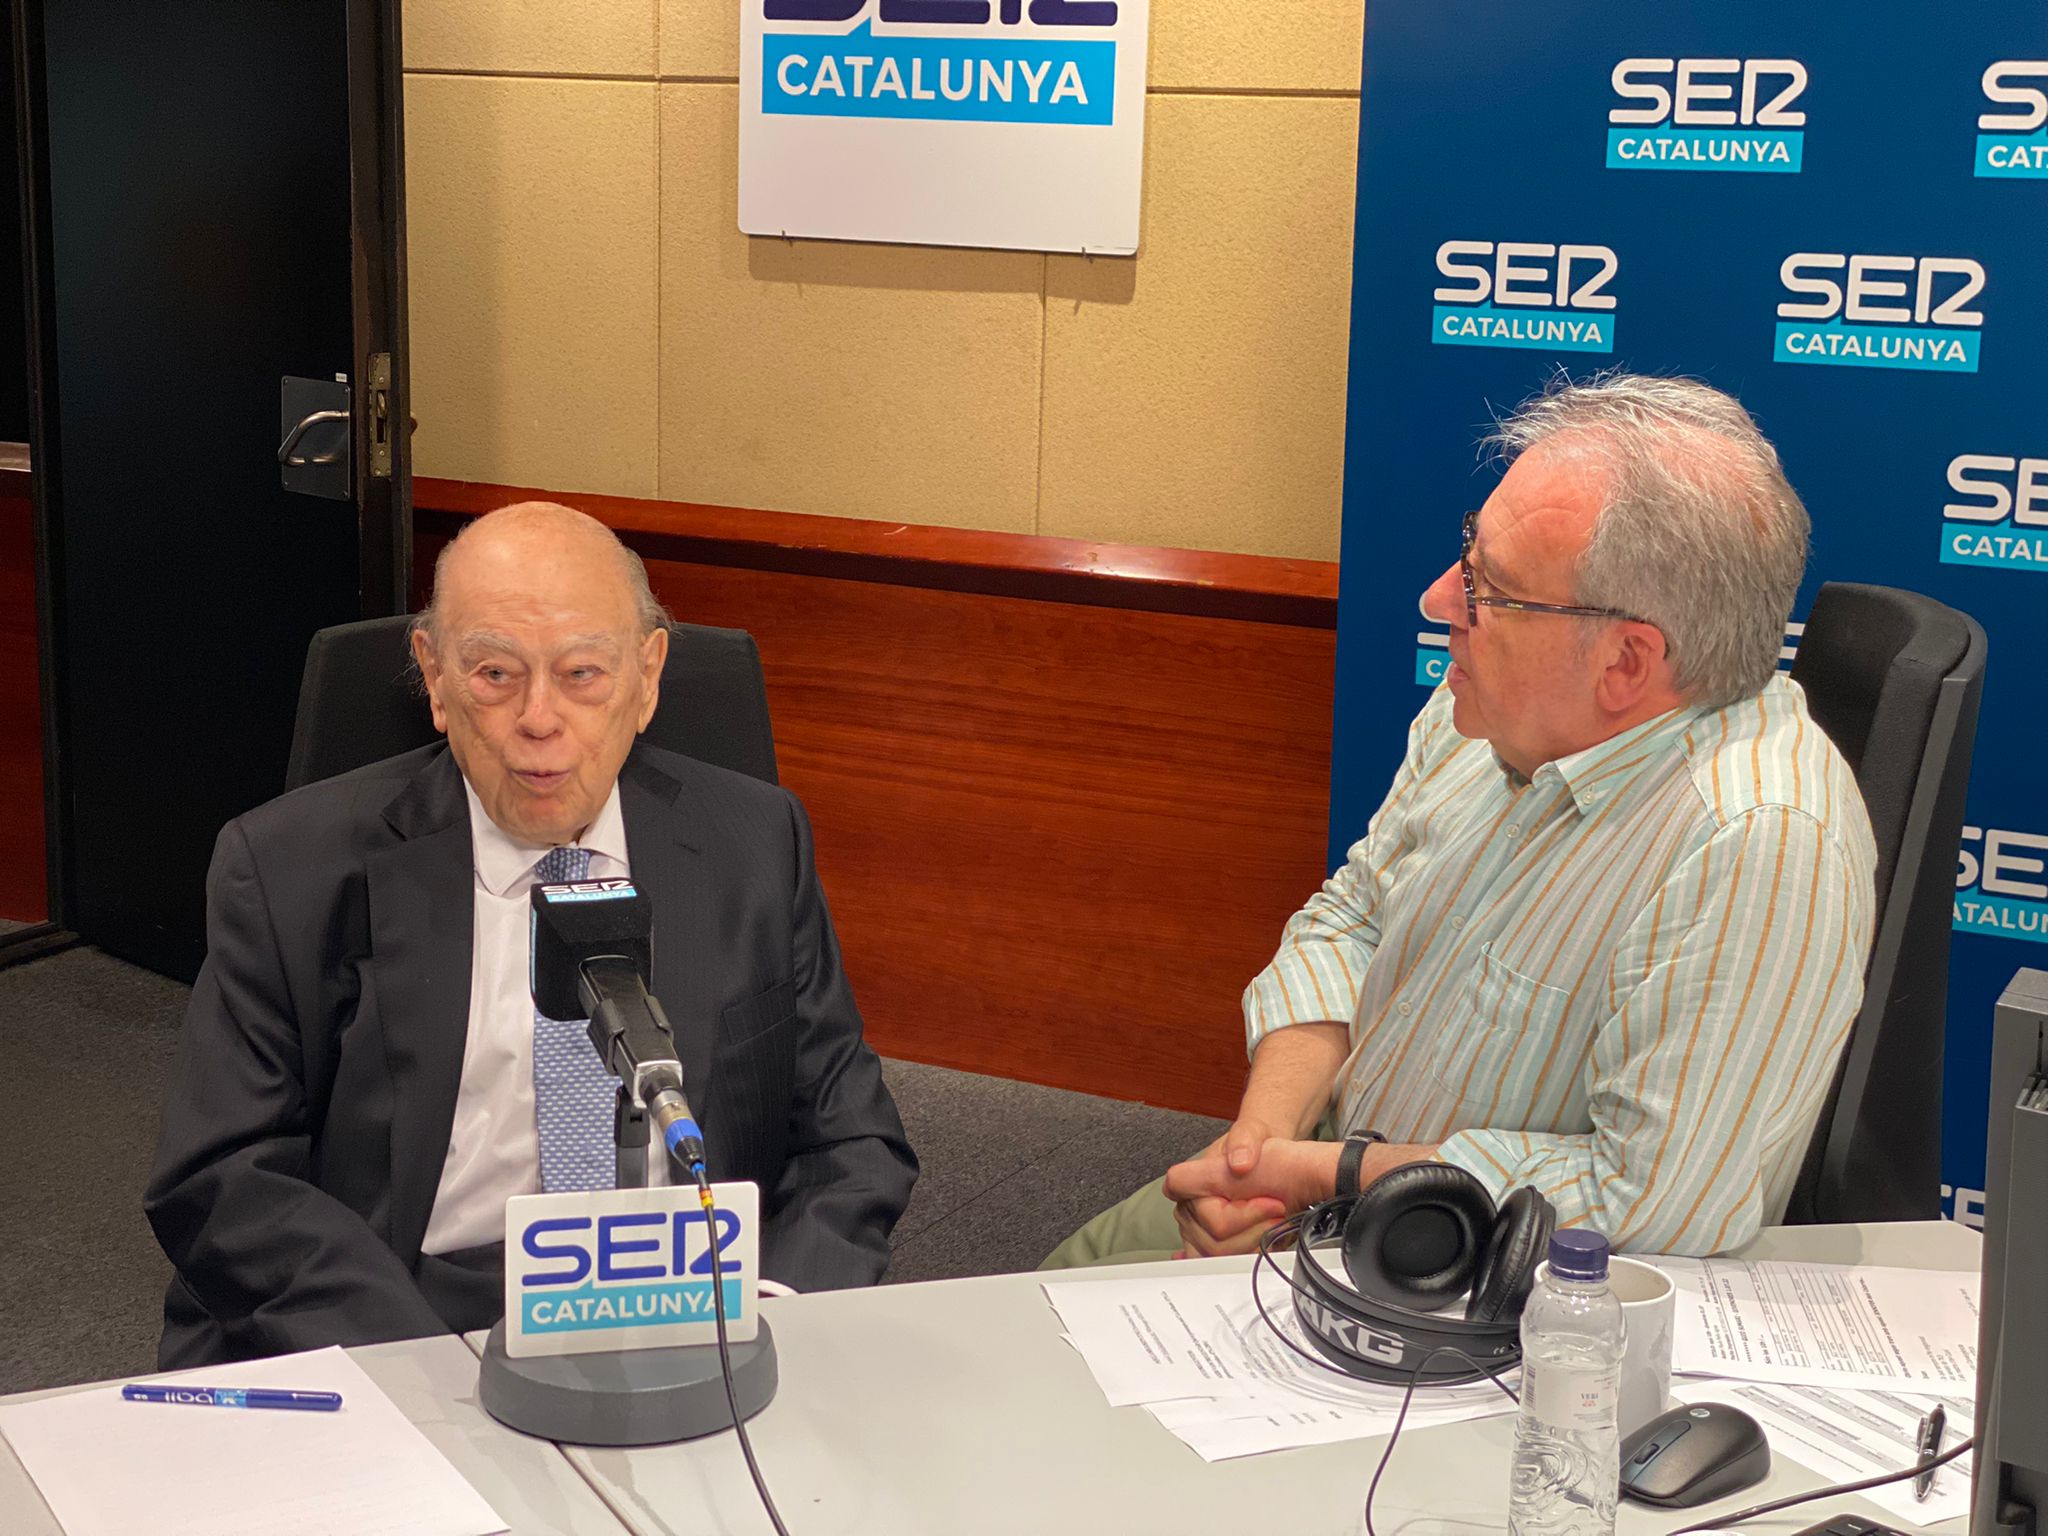 Jordi Pujol: "Catalonia is sad, confused, and politically, it's just not working"